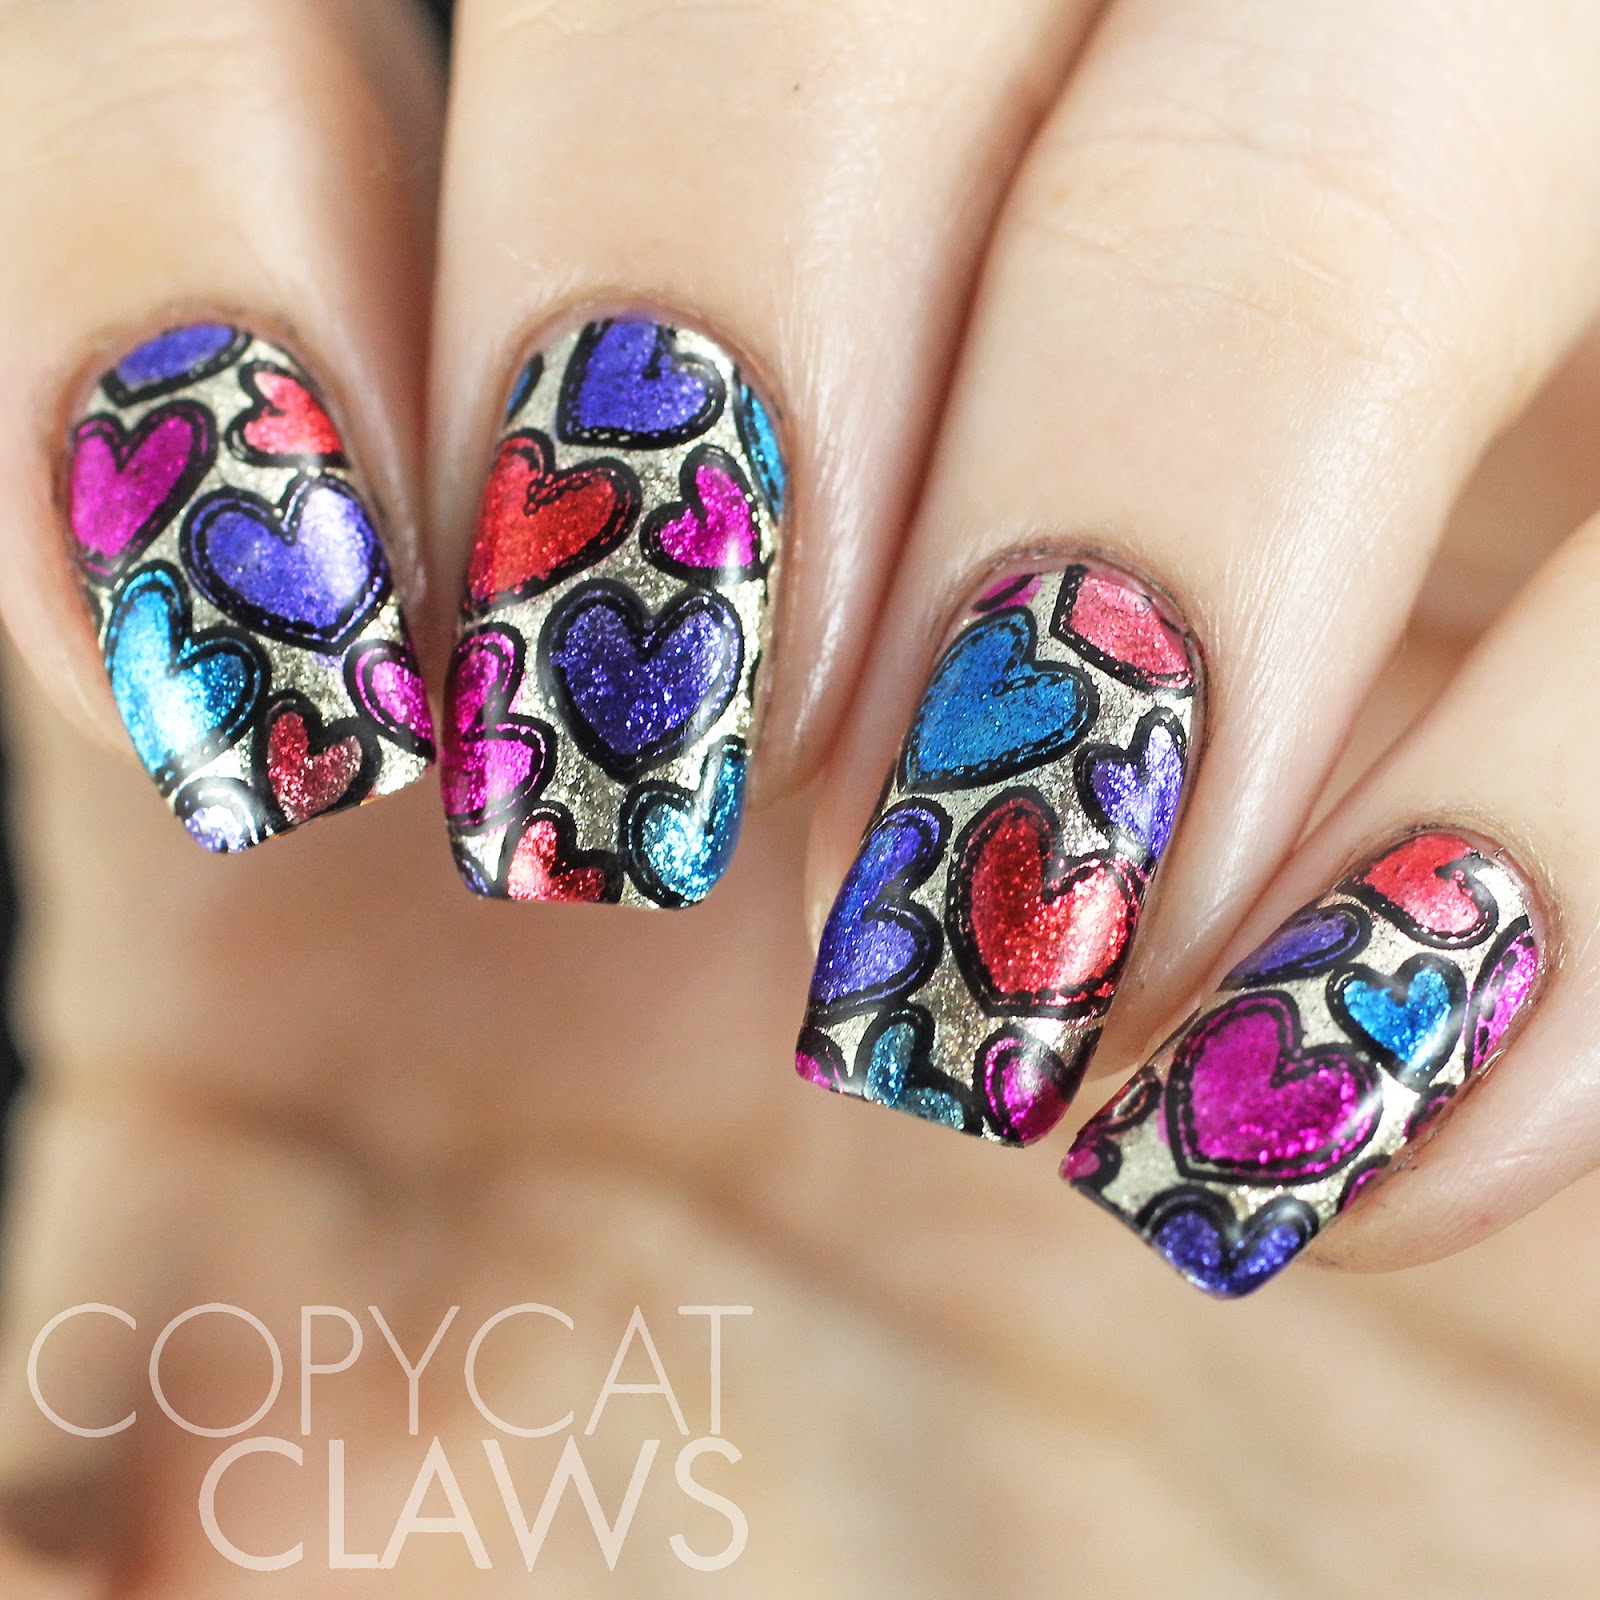 Copycat Claws: Leadlighting Heart Stamping